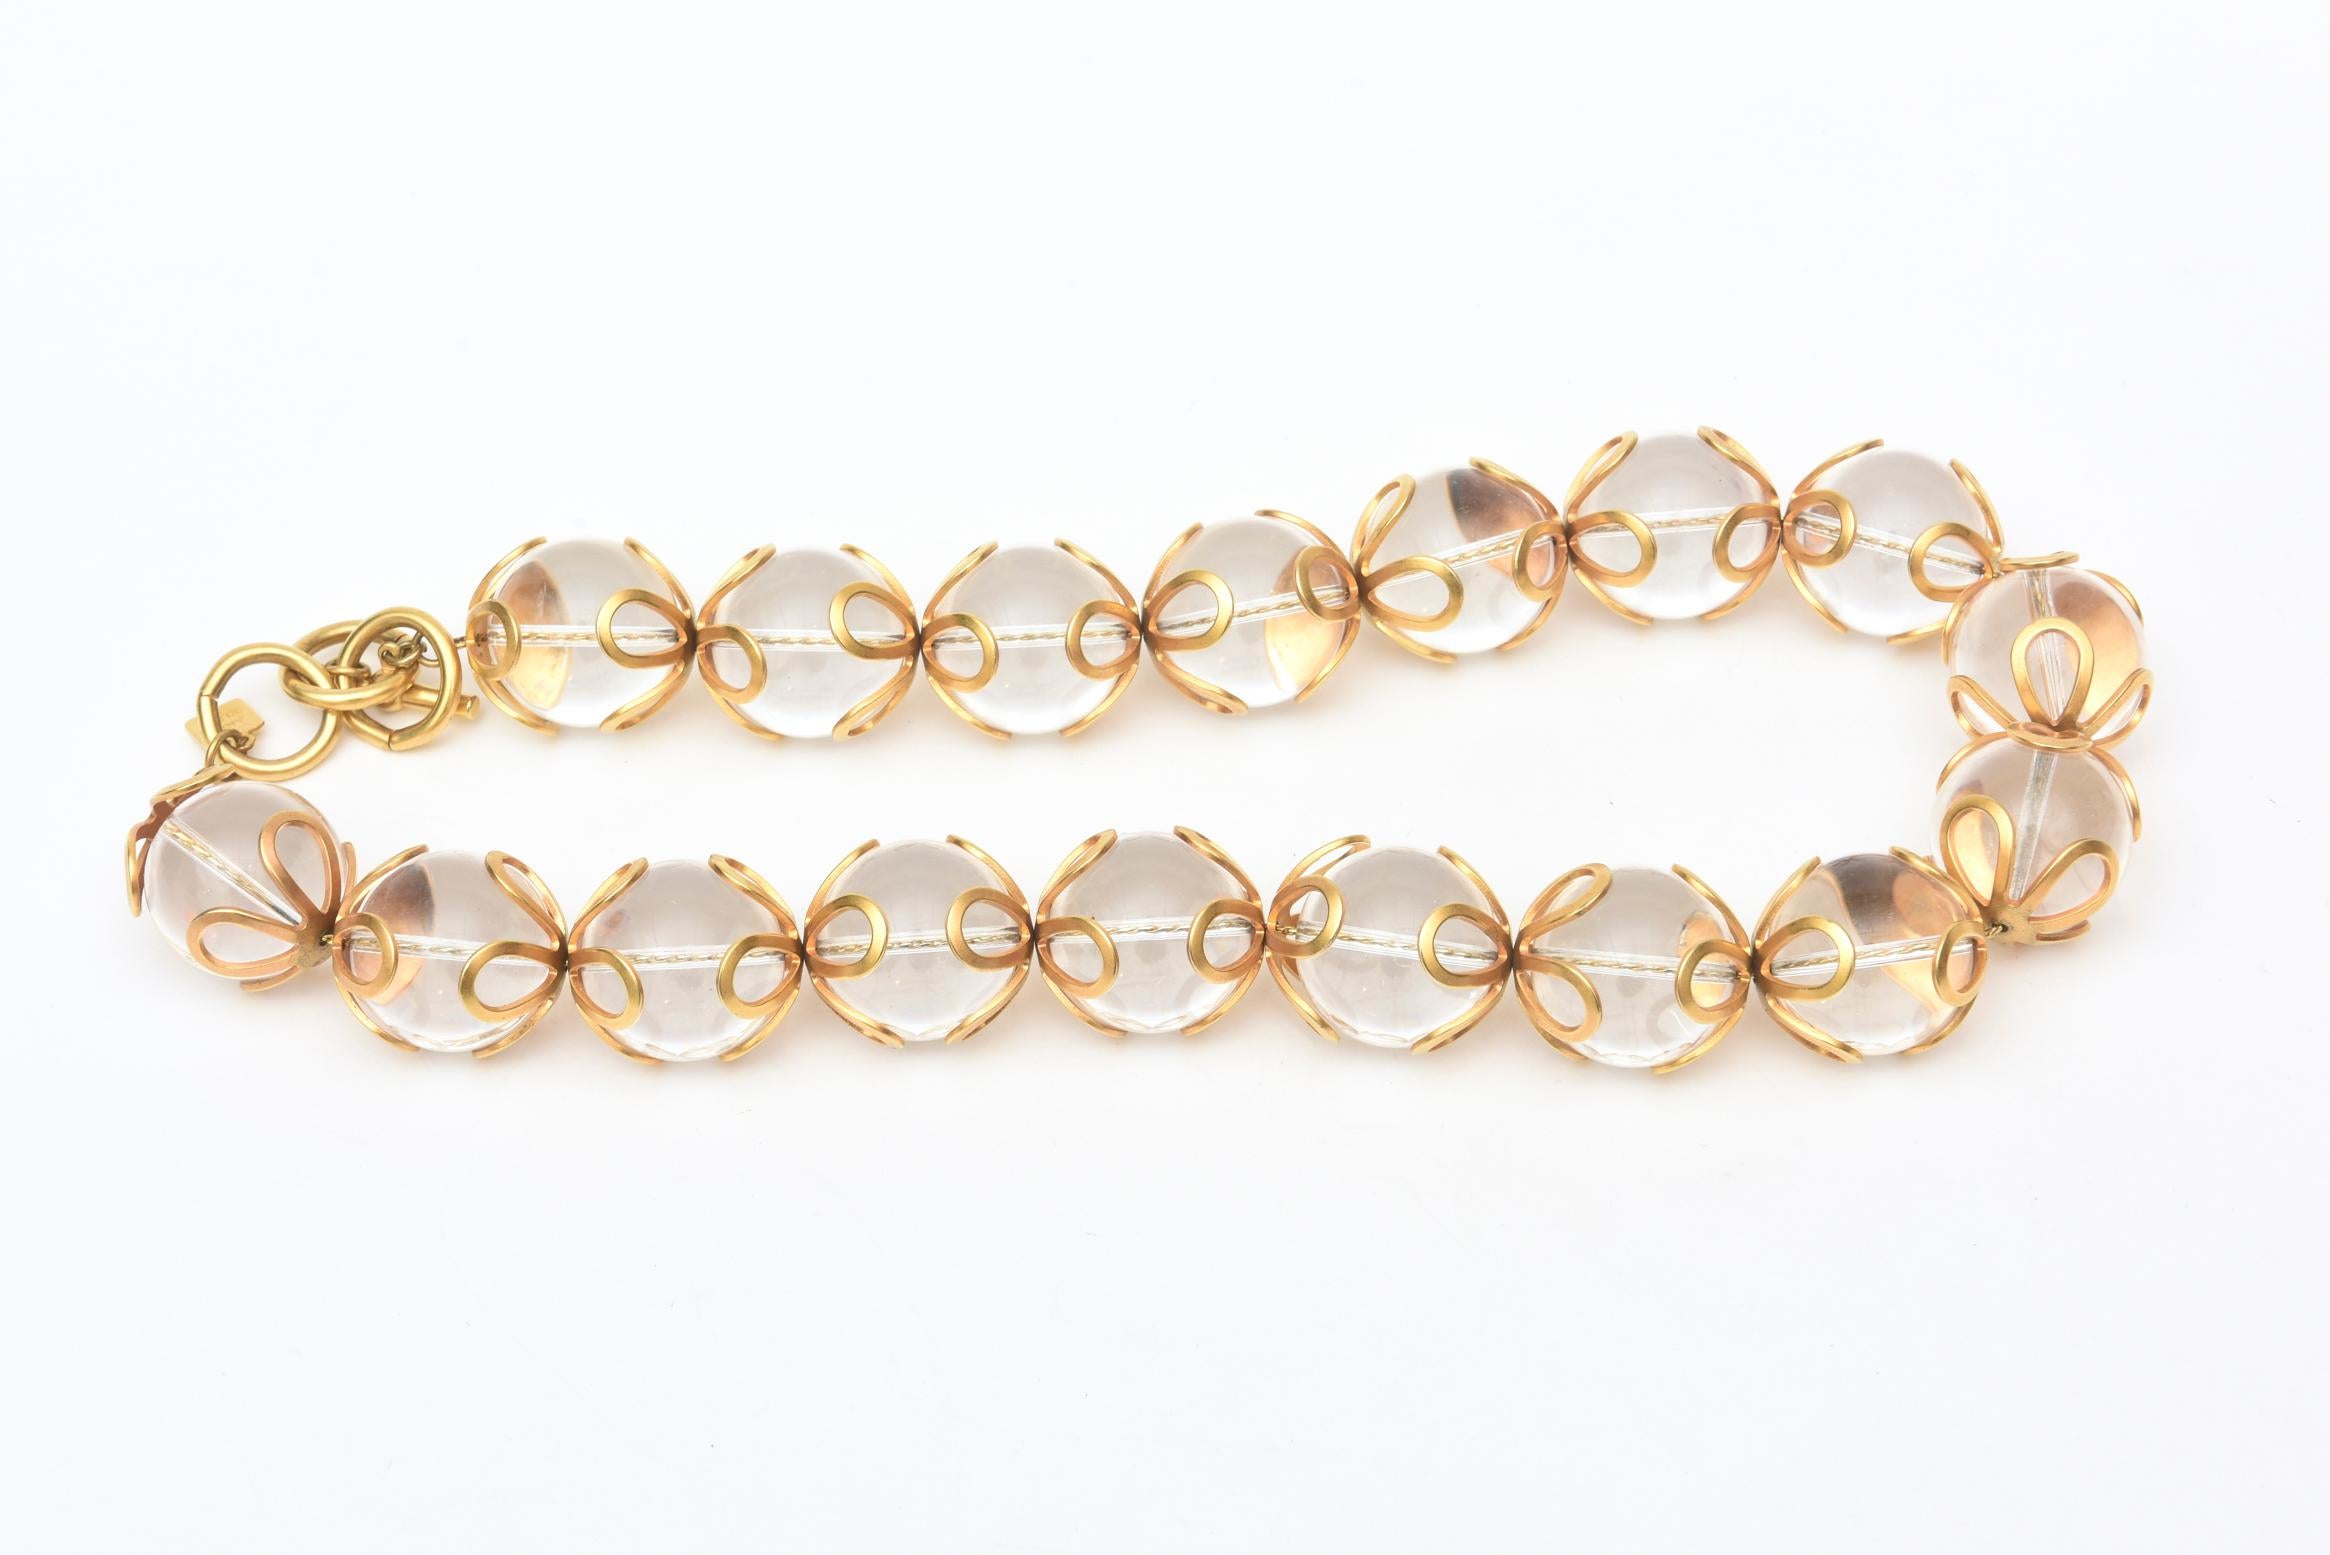 This great original vintage Anne Klein chunky lucite ball and gold filed embellished loop design necklace is from when Anne Klein was still living designing  jewelry. The series of loops surround the top and bottom of each lucite ball. It is from